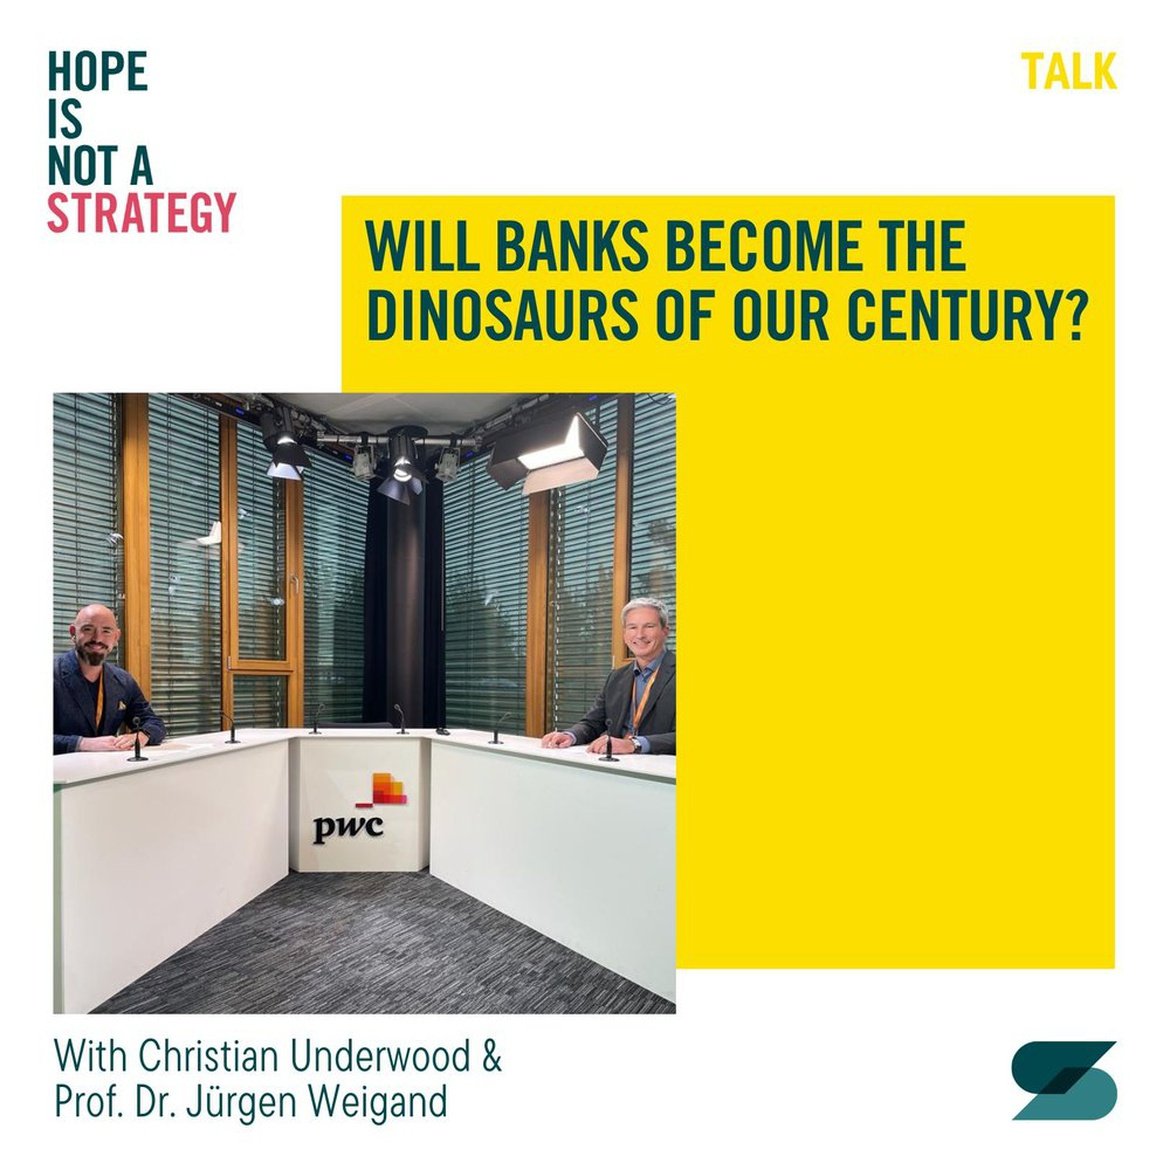 WILL BANKS BECOME THE DINOSAURS OF OUR CENTURY?